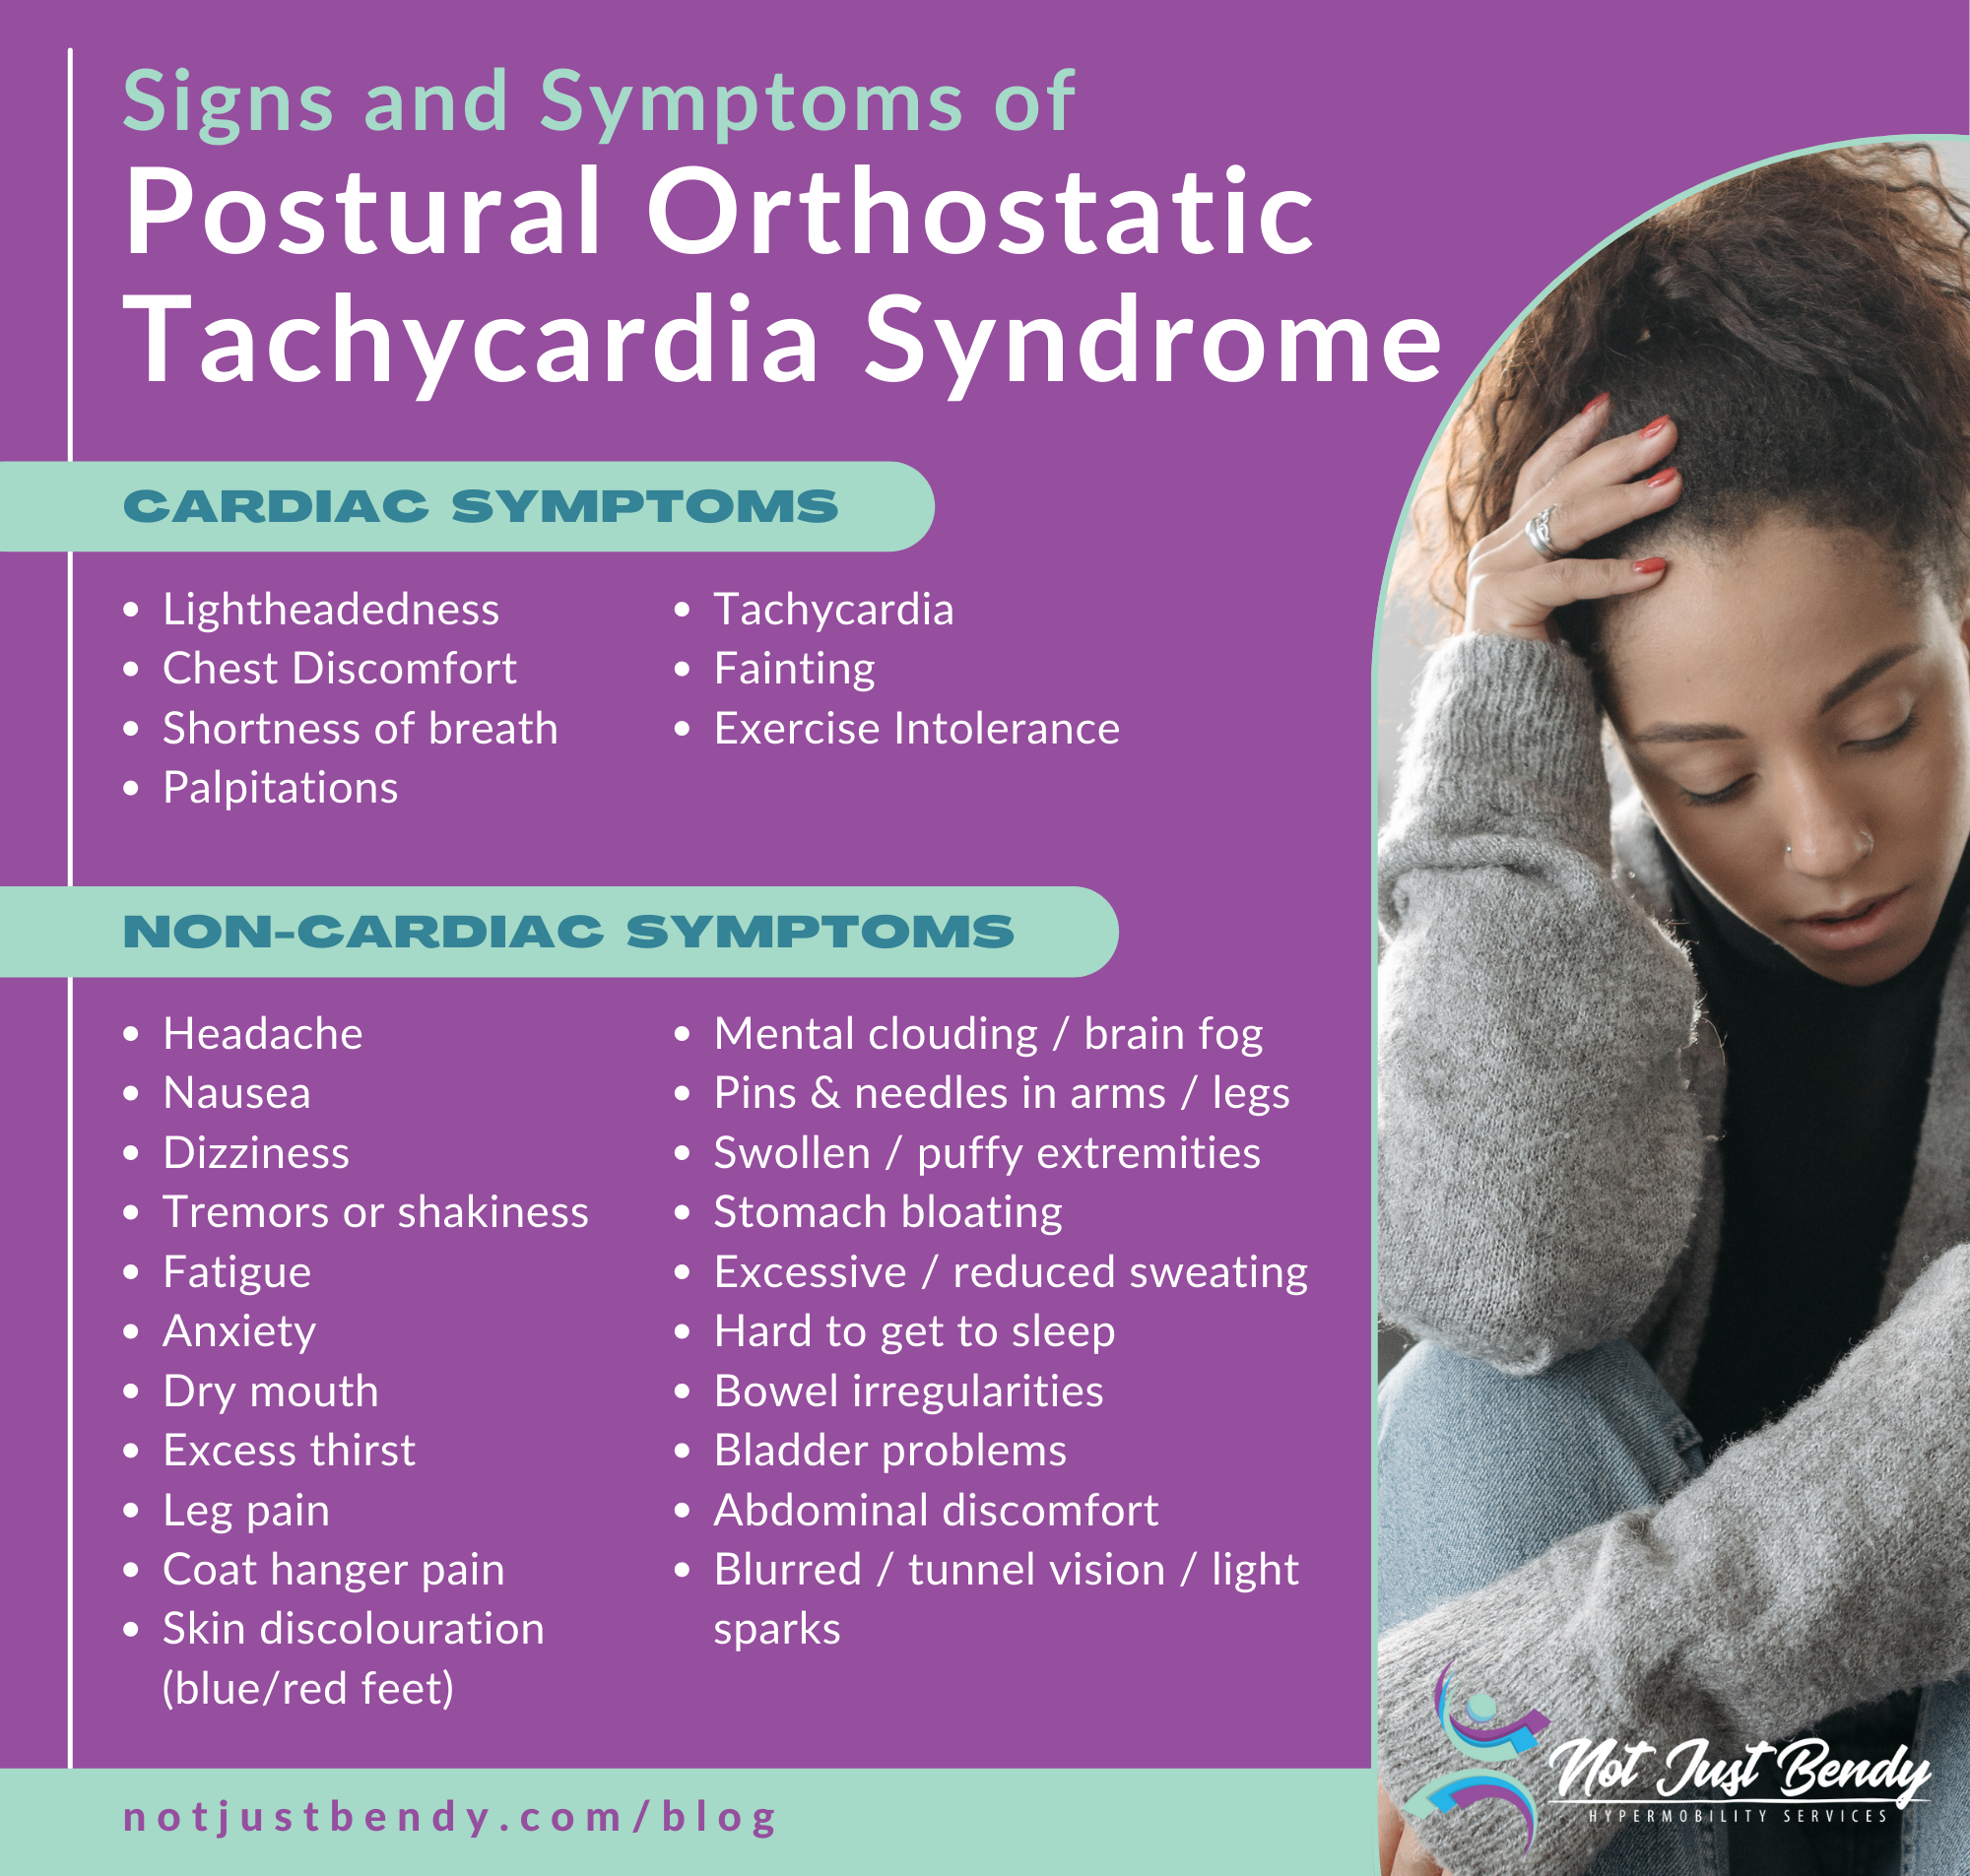 Thedoctorwrites - Postural orthostatic tachycardia syndrome (POTS